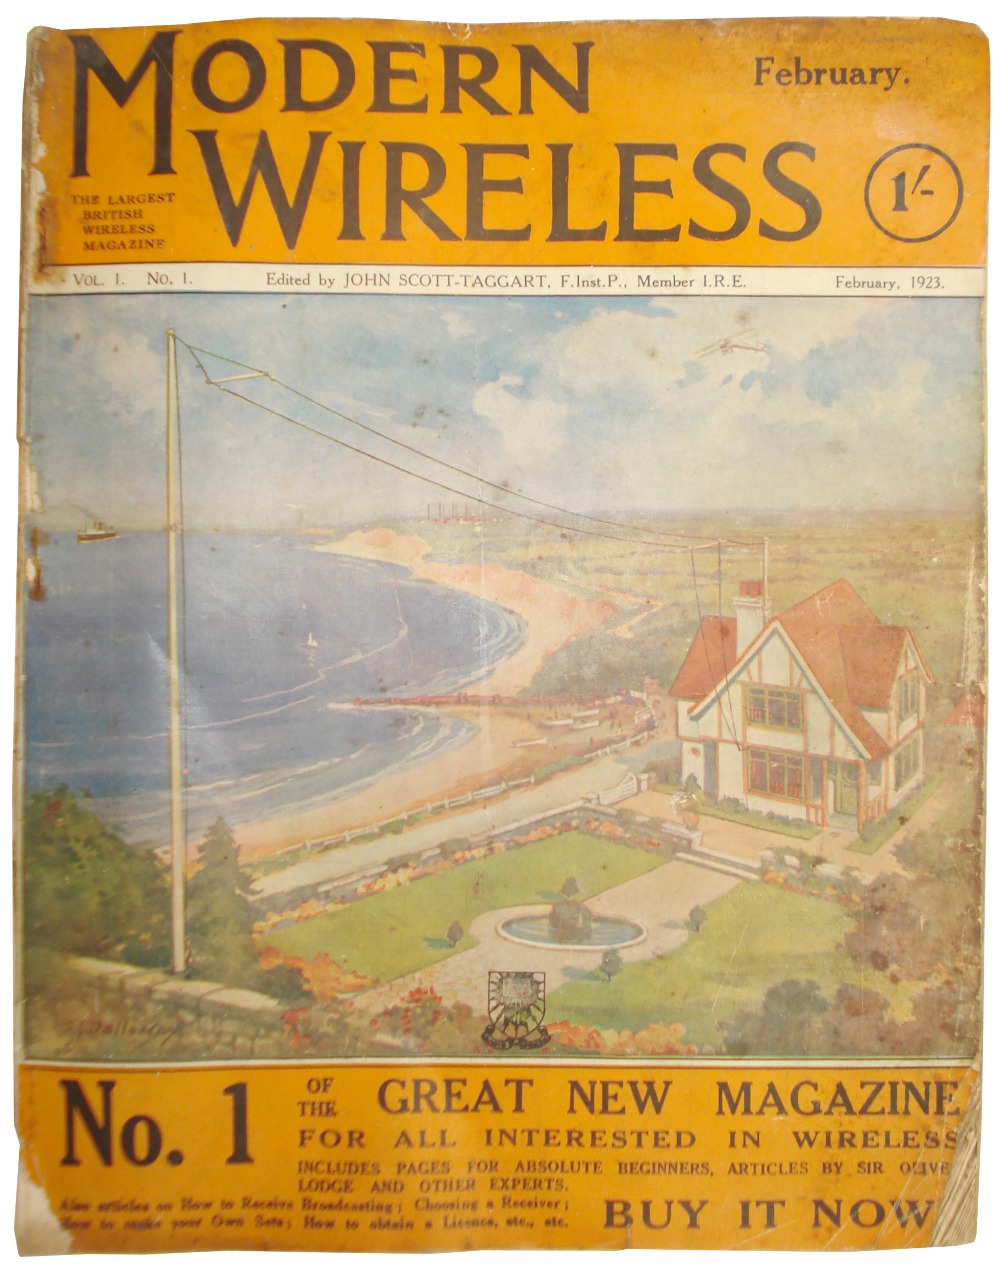 Modern Wireless monthly: February 1923, Vol. I, No. 1, The very first issue, orange front page